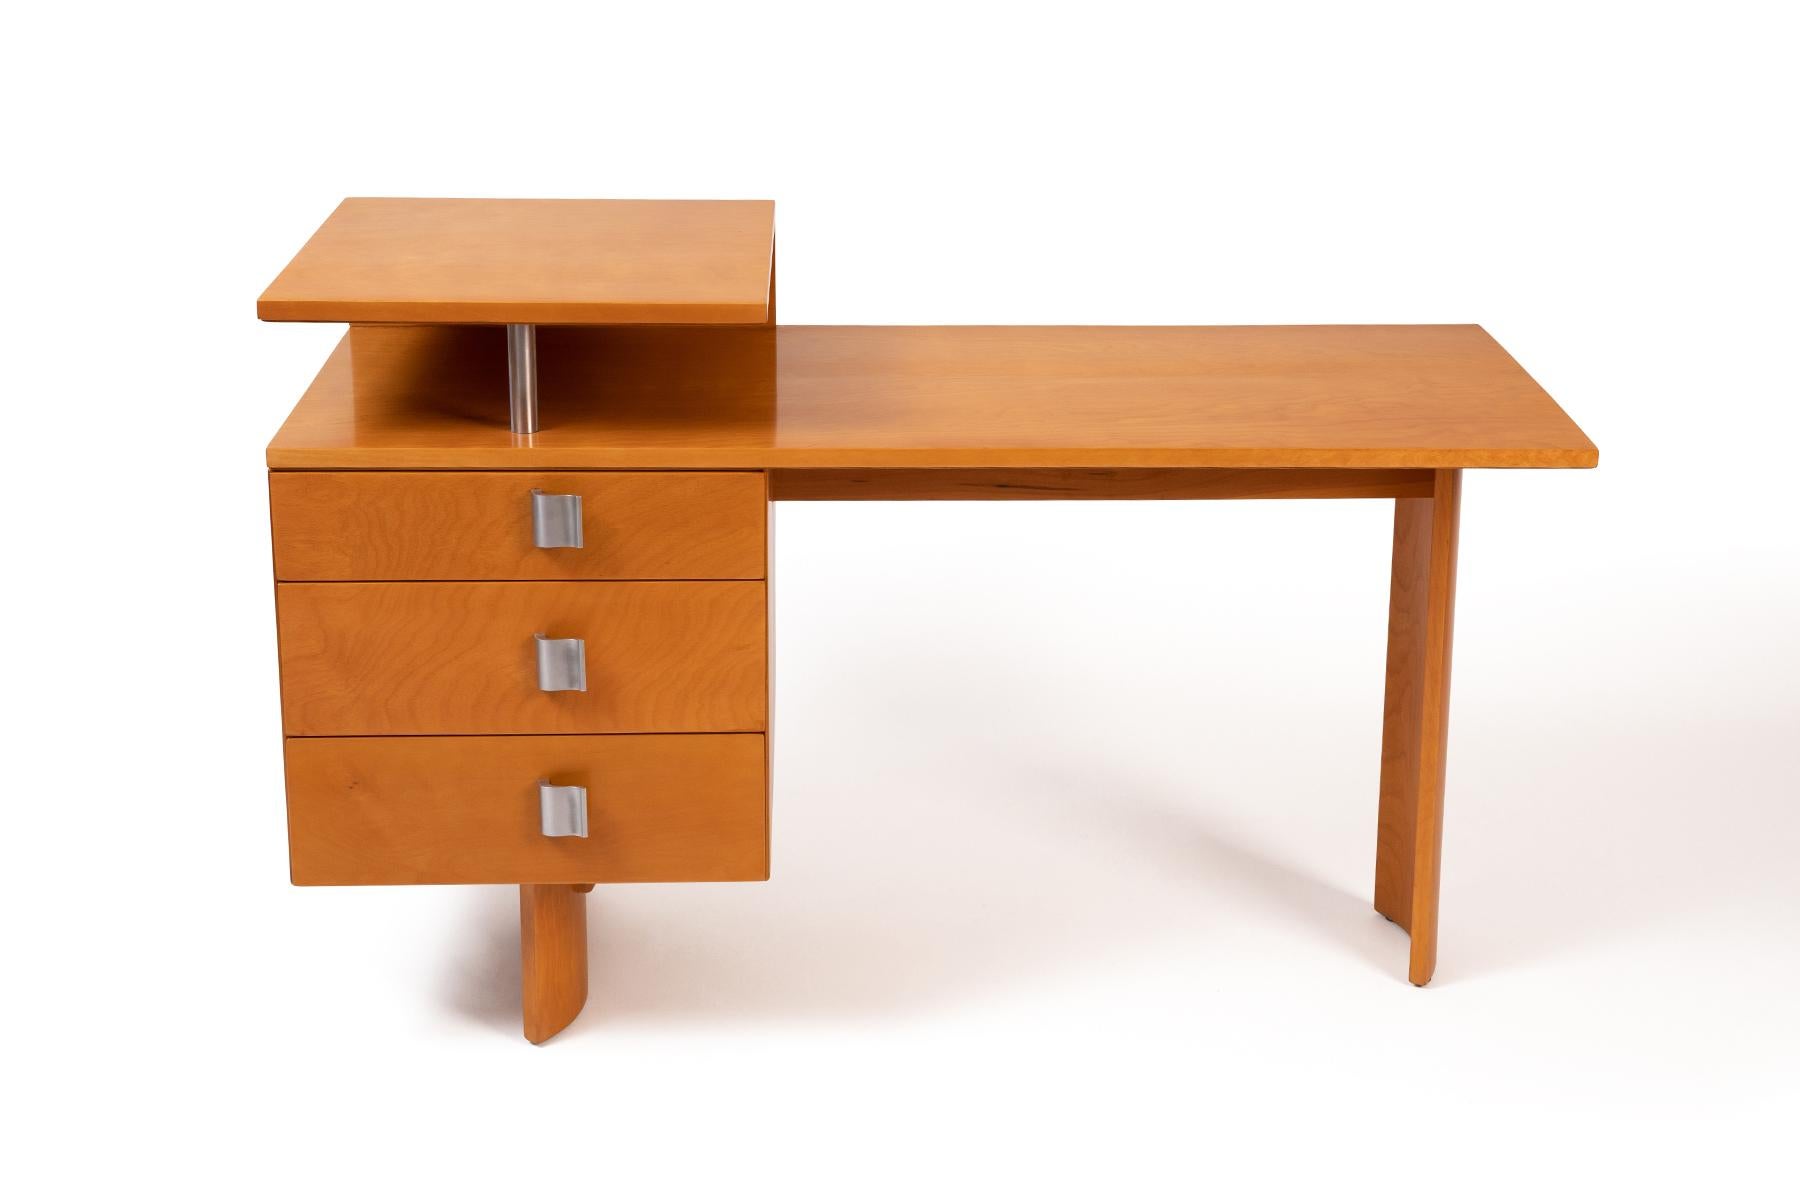 Eliel Saarinen for Johnson desk circa 1948. This rare example executed in birch has three drawers, sculptural s shaped legs and formed aluminum pulls. It has been masterfully restored. Please see our other listings for the accompanying chests from